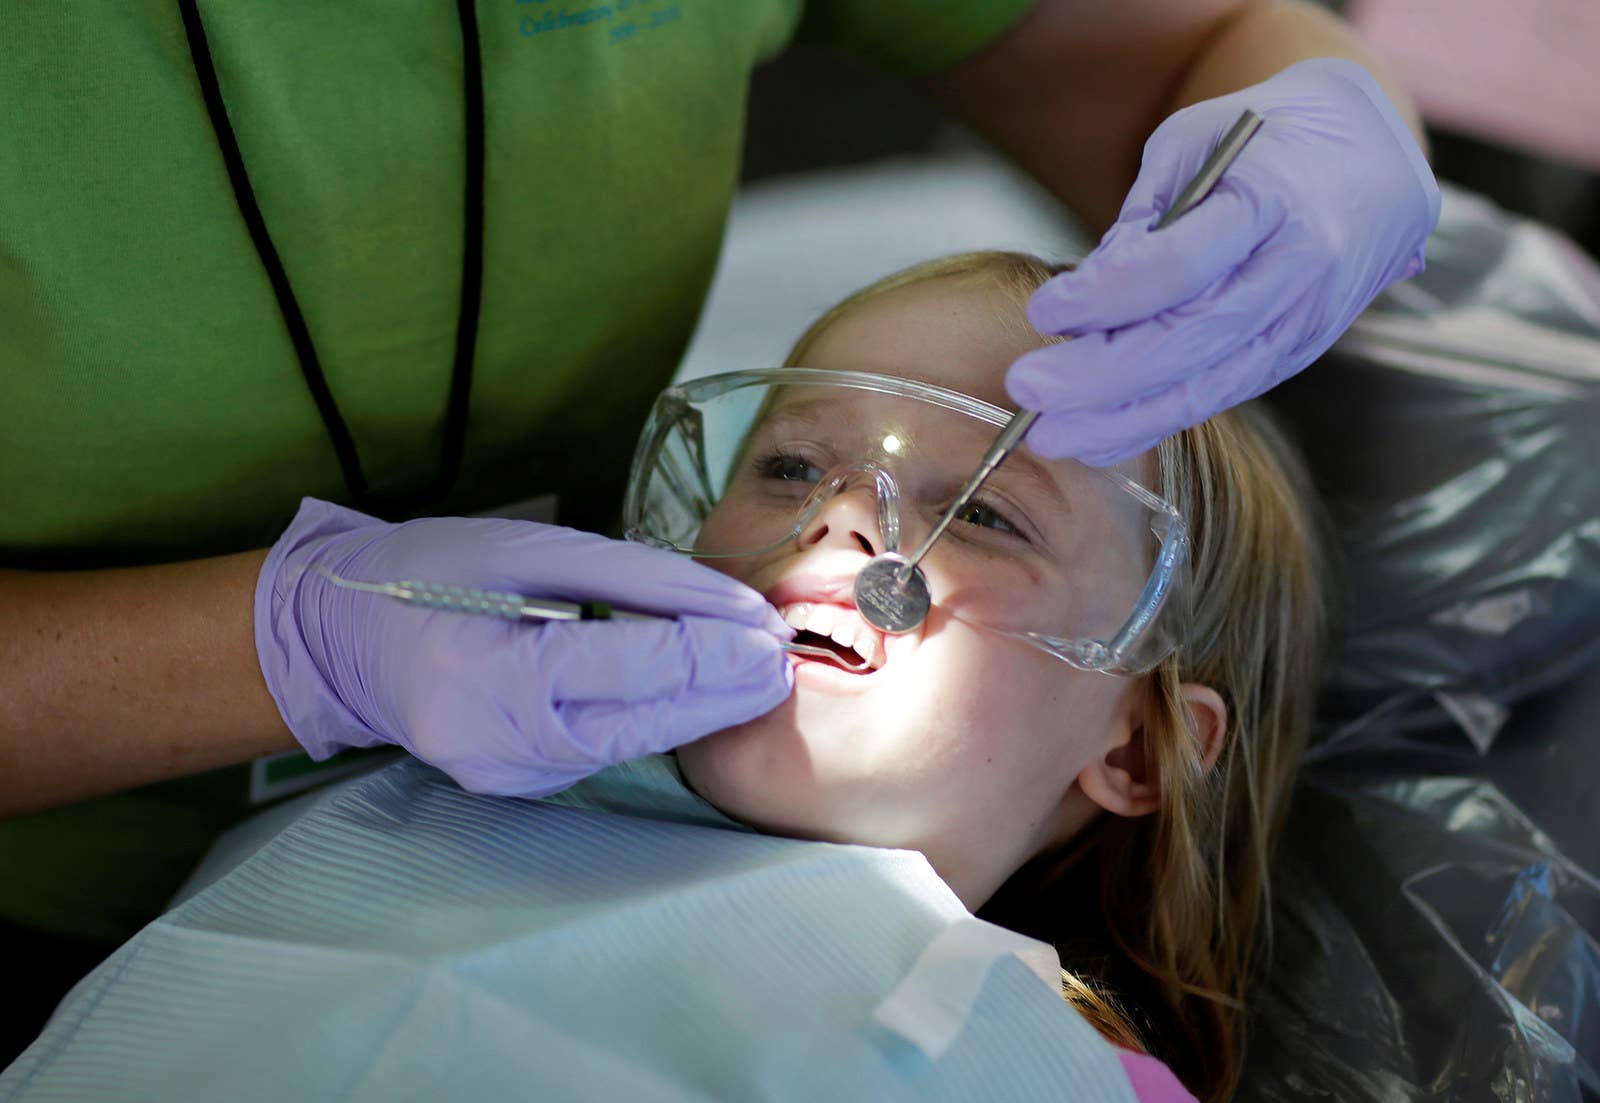 Six-year-old Mallory Collin of Abington, Virginia, has her teeth cleaned at the RAM clinic in Wise on July 22.